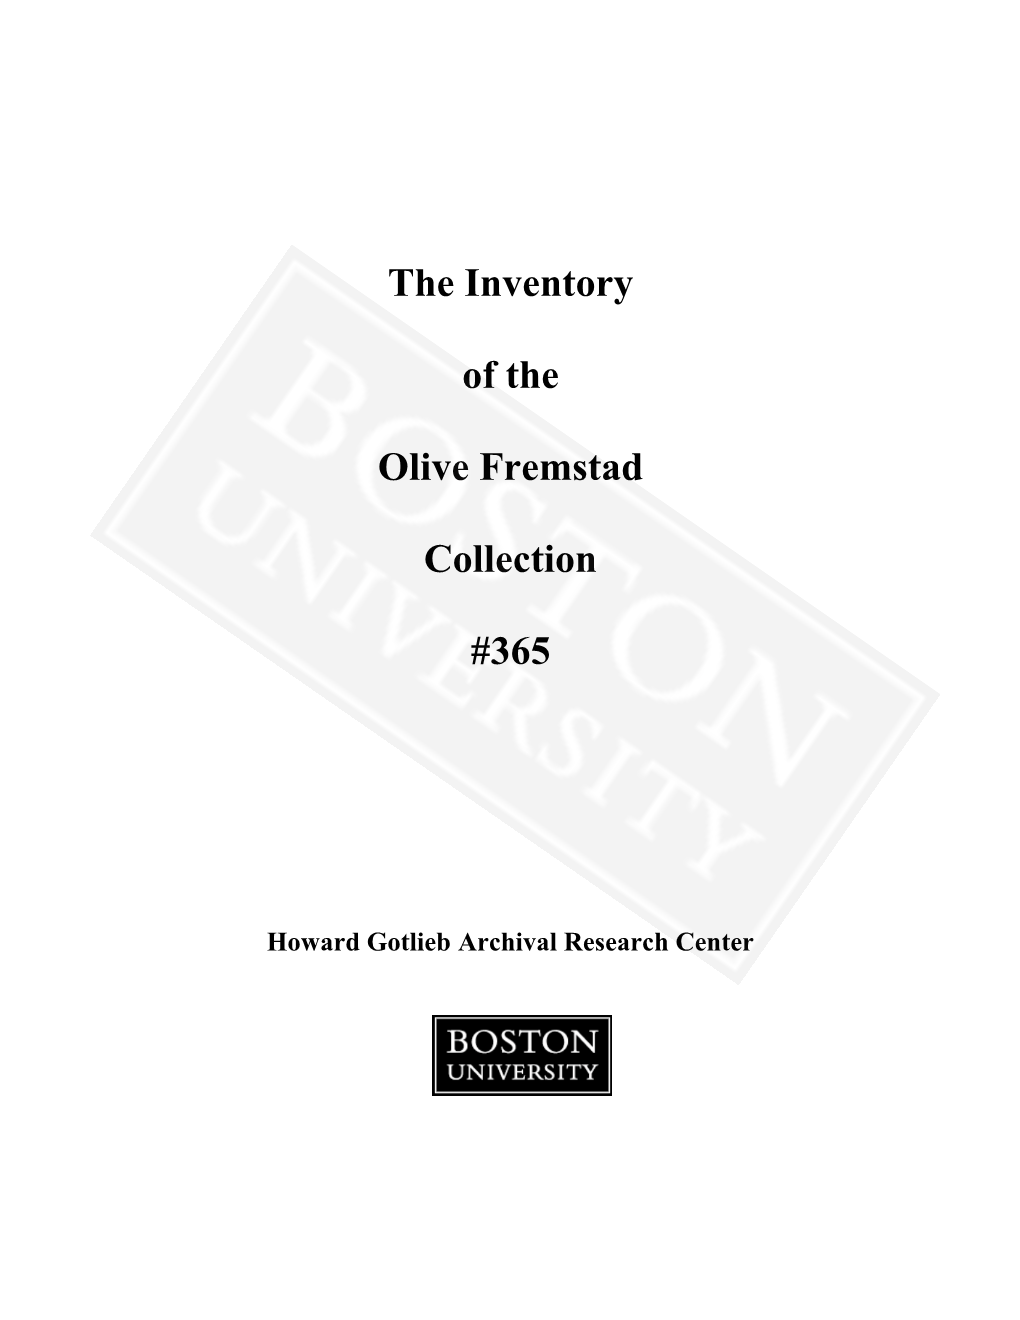 The Inventory of the Olive Fremstad Collection #365